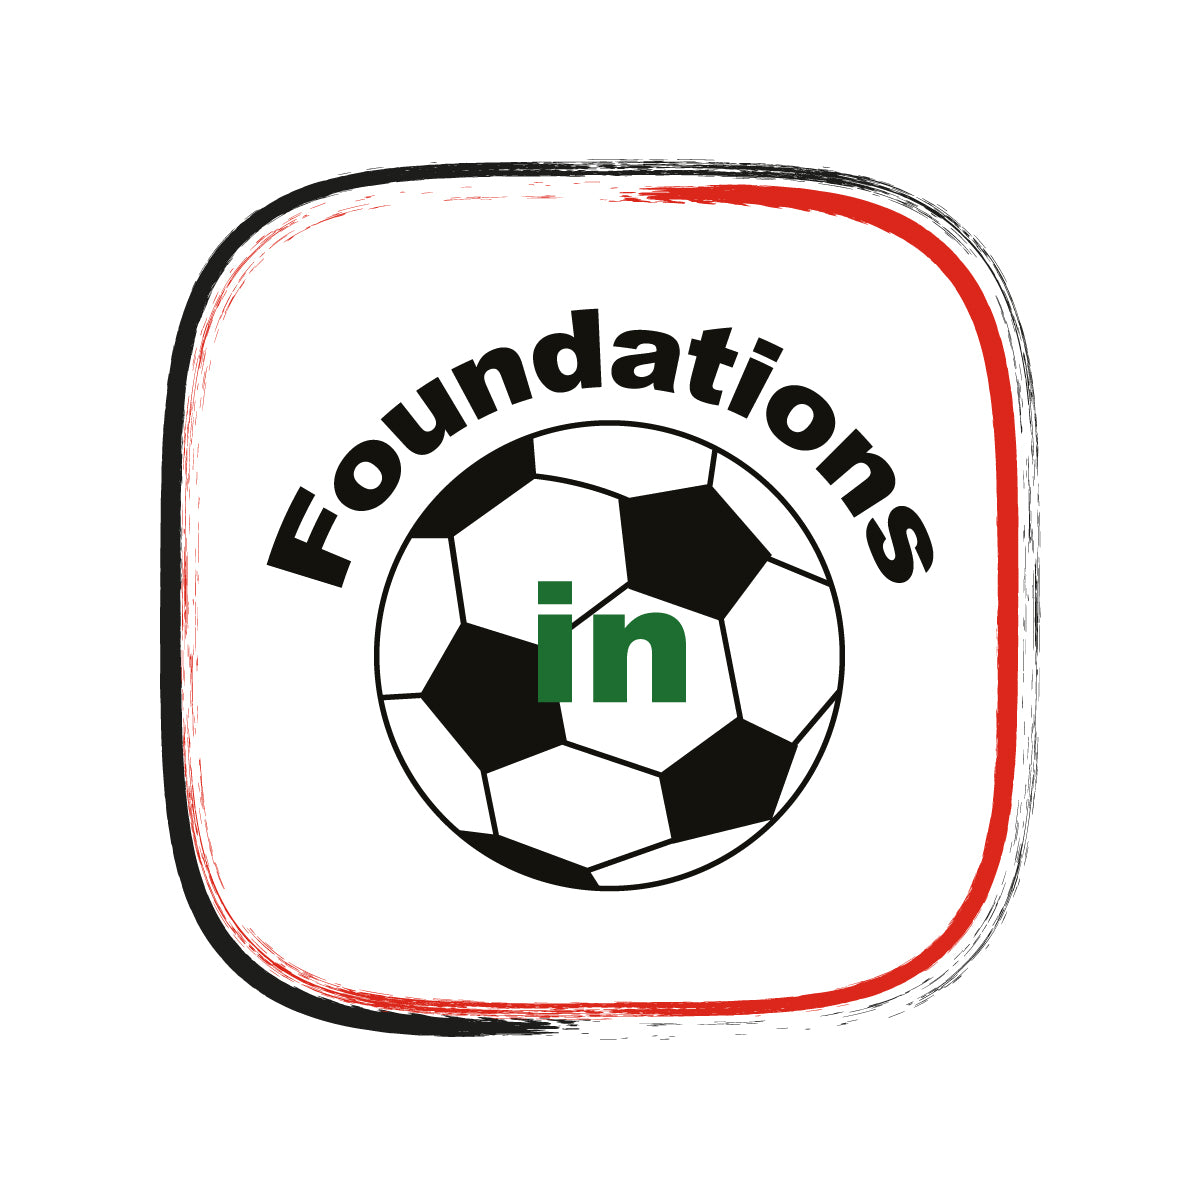 Foundations in Football